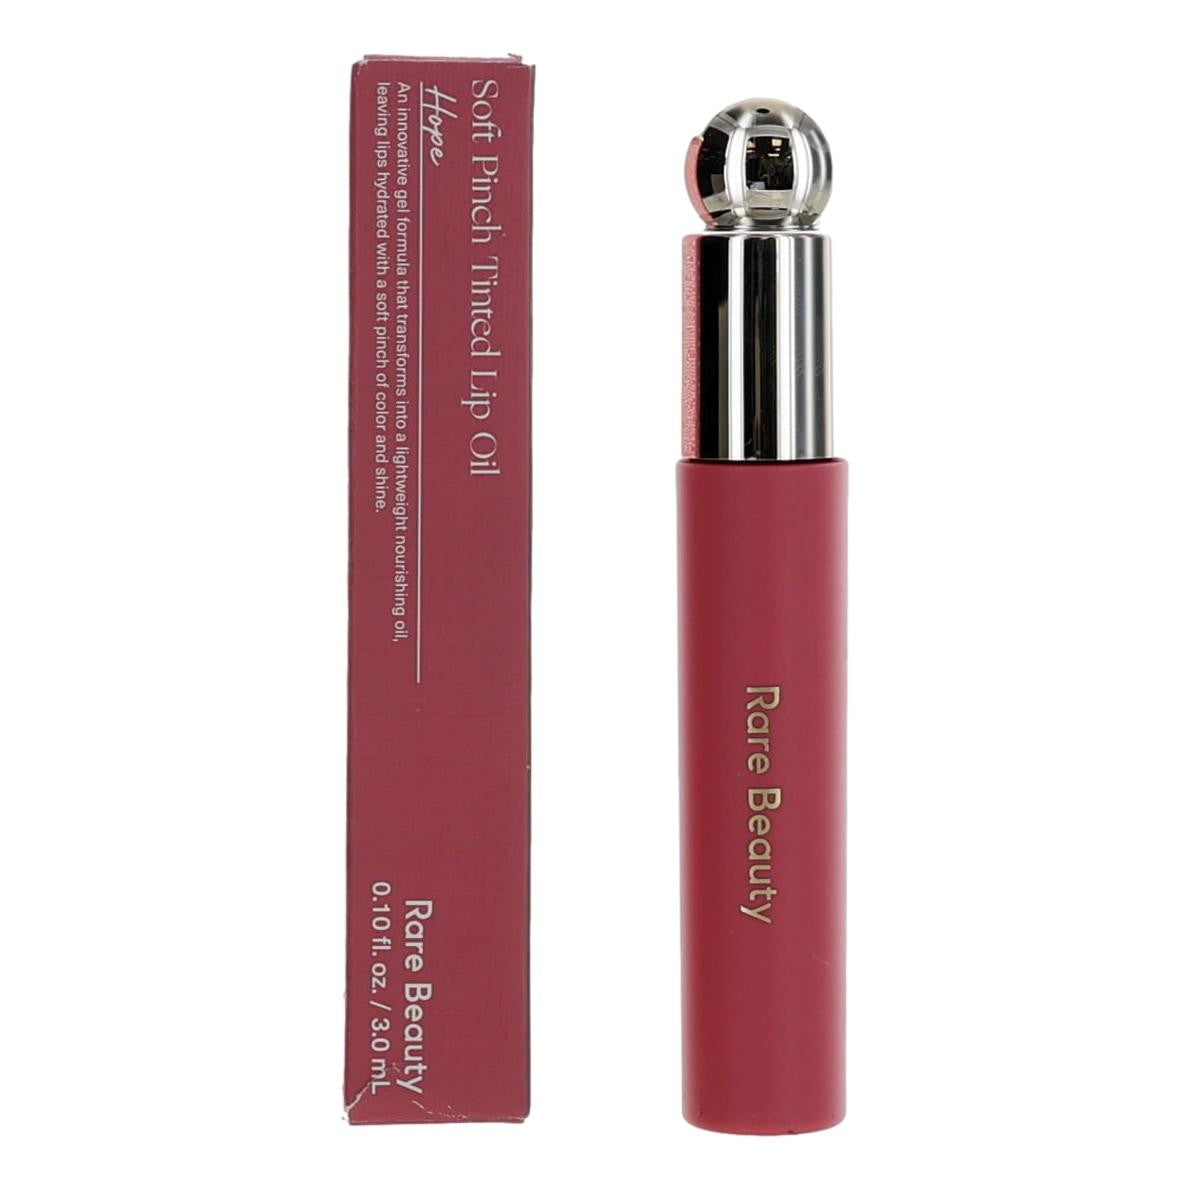 Rare Beauty Soft Pinch Lip Oil by Rare Beauty, .10oz Tinted Lip Oil - Hope - Hope